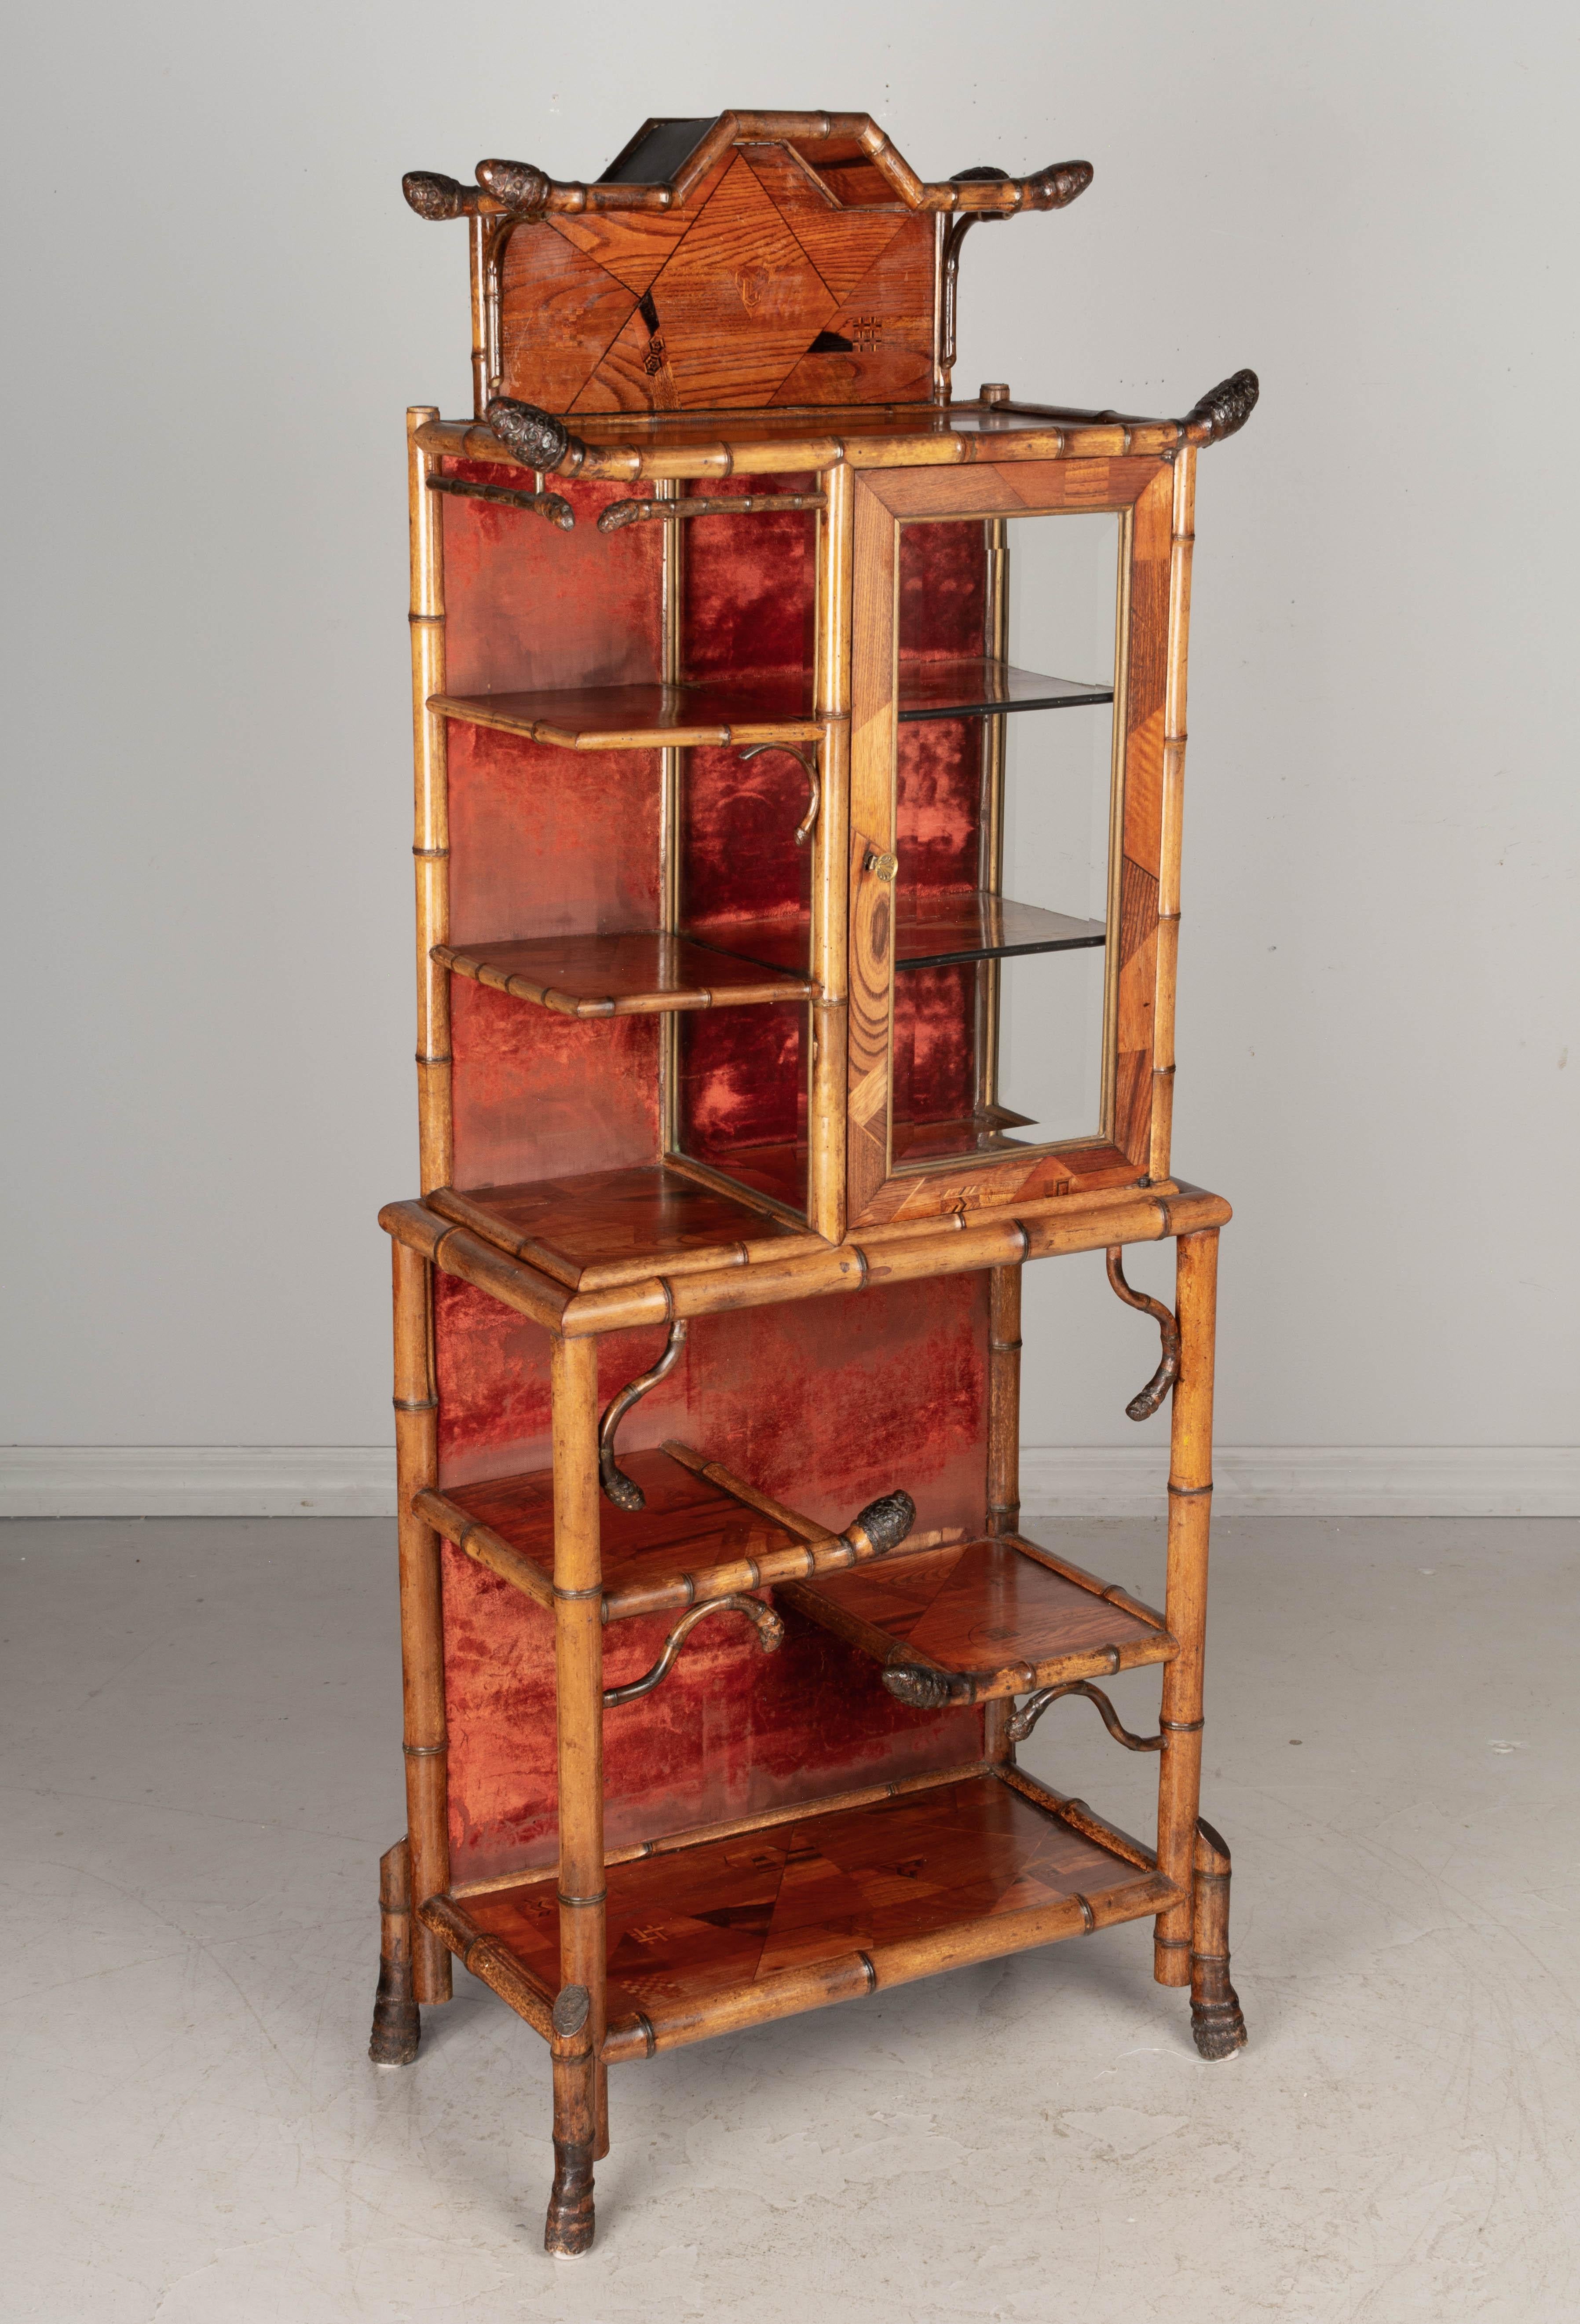 A 19th century French bamboo etagere with asymmetric openwork bamboo shelves and a beveled glass paned cabinet with working lock and key. Back panel is lined in the original red velvet fabric, worn in places. Pagoda style crown with large finials